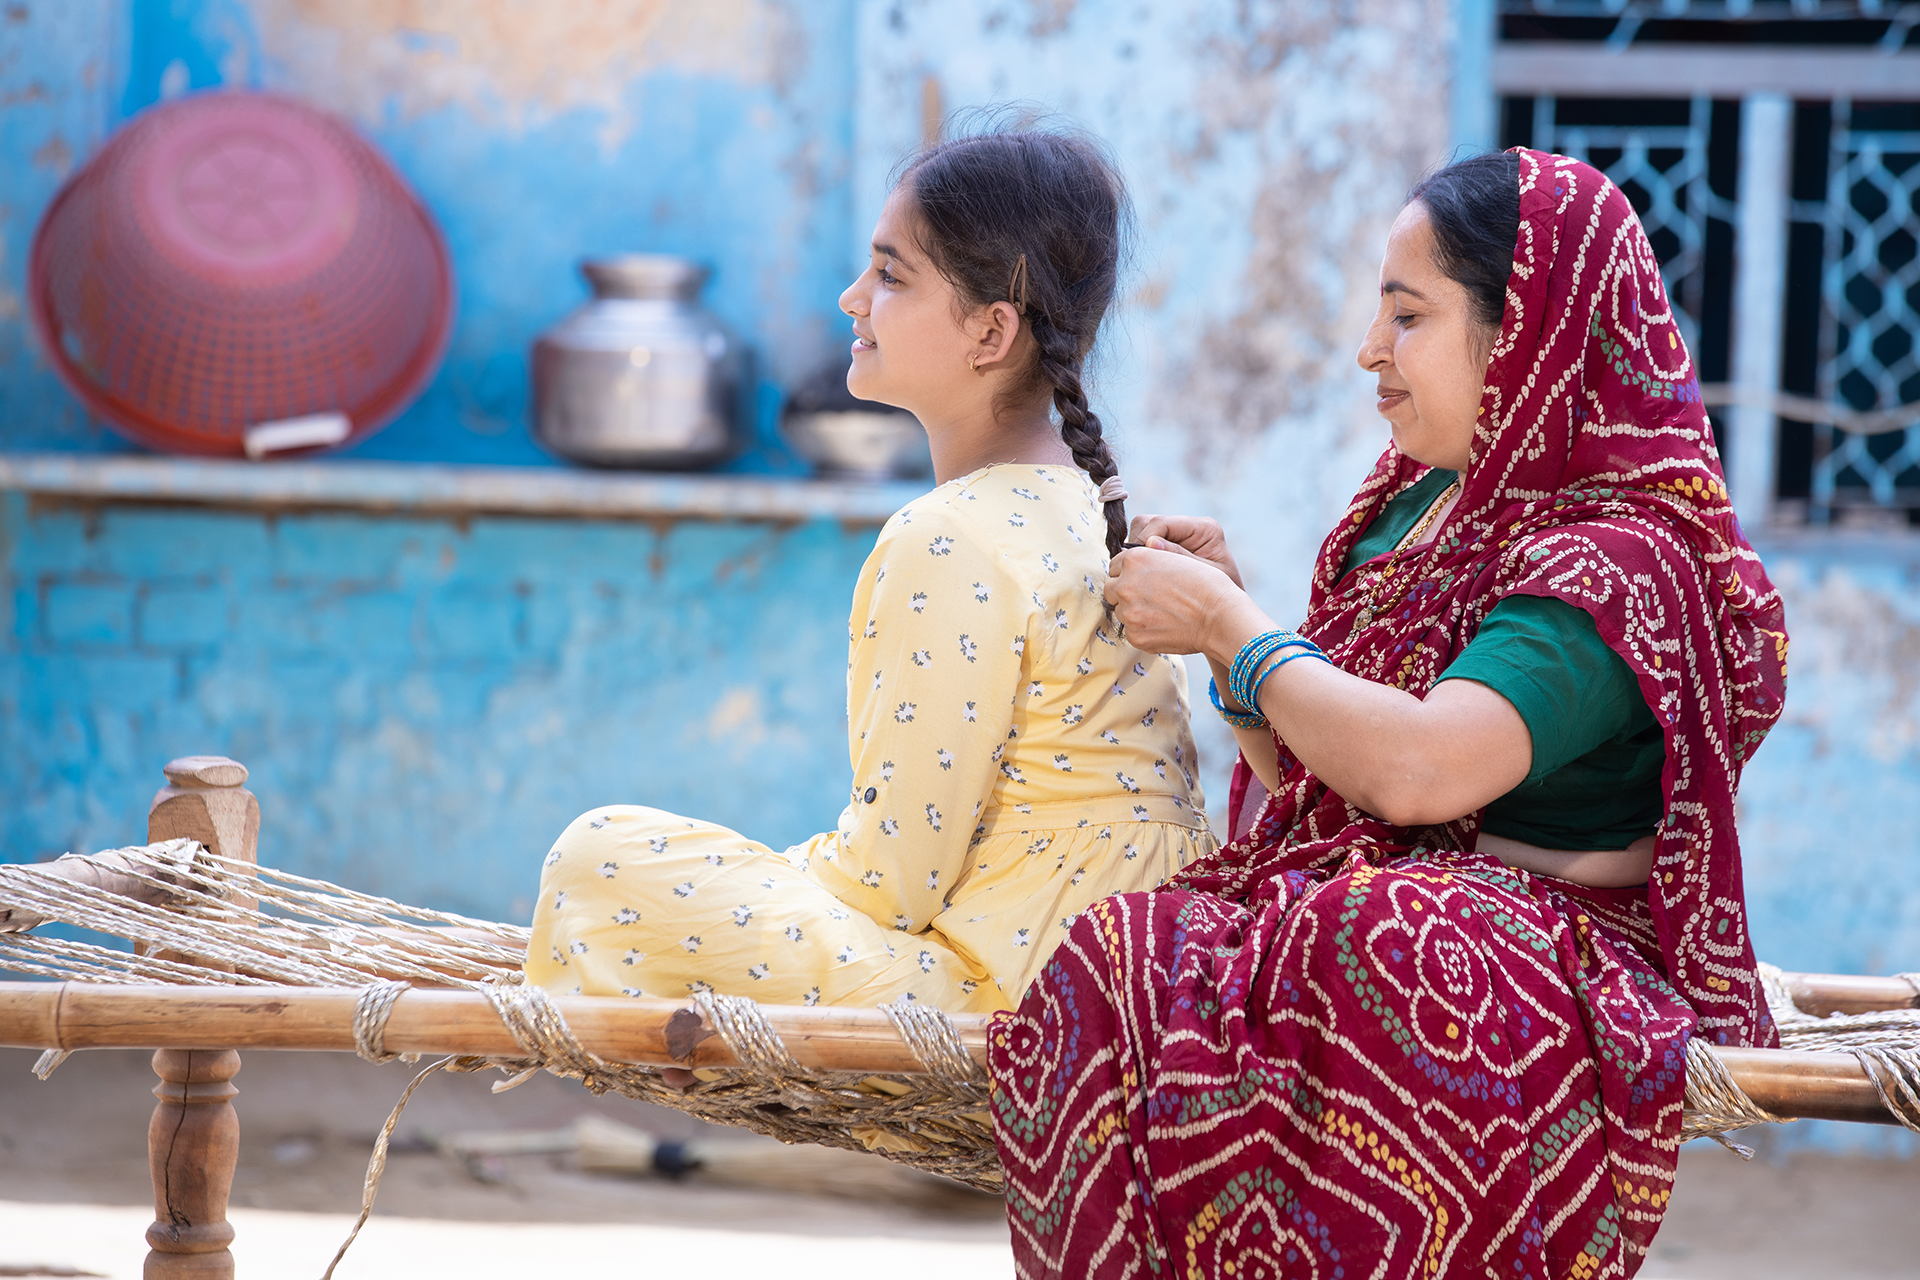 An Indian mother sits behind her daughter, braiding her hair. Both are smiling.